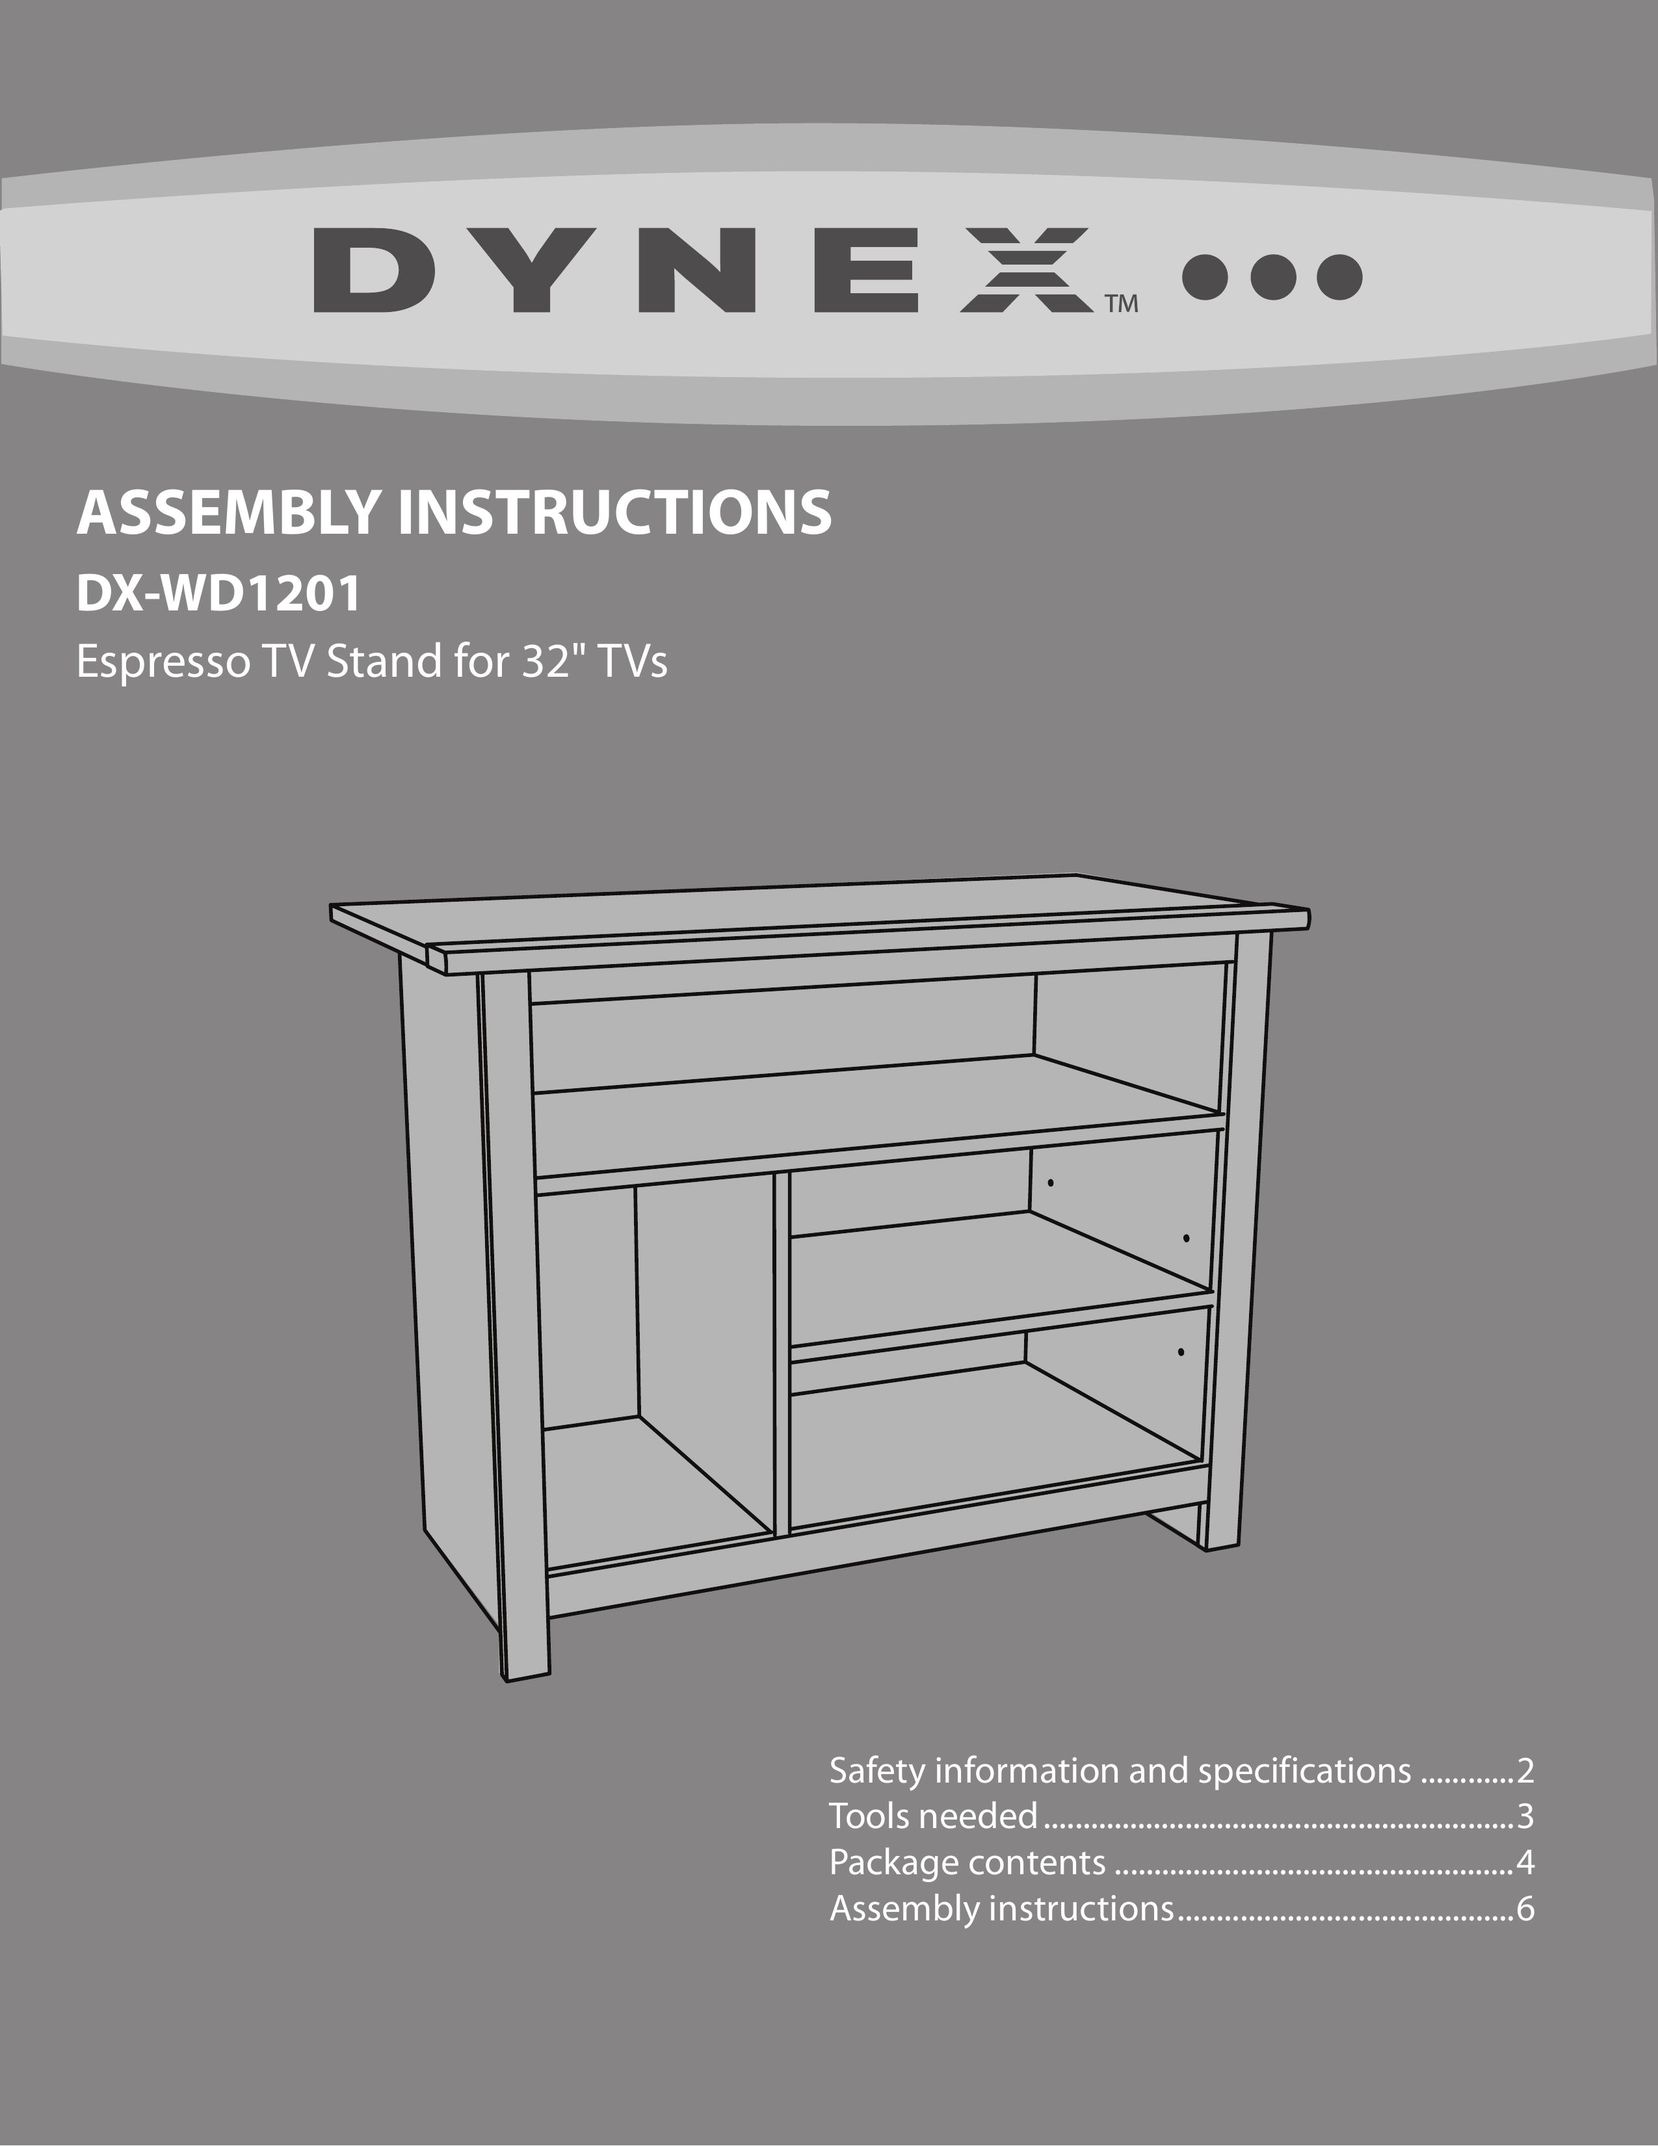 Dynex DX-WD1201 TV Video Accessories User Manual